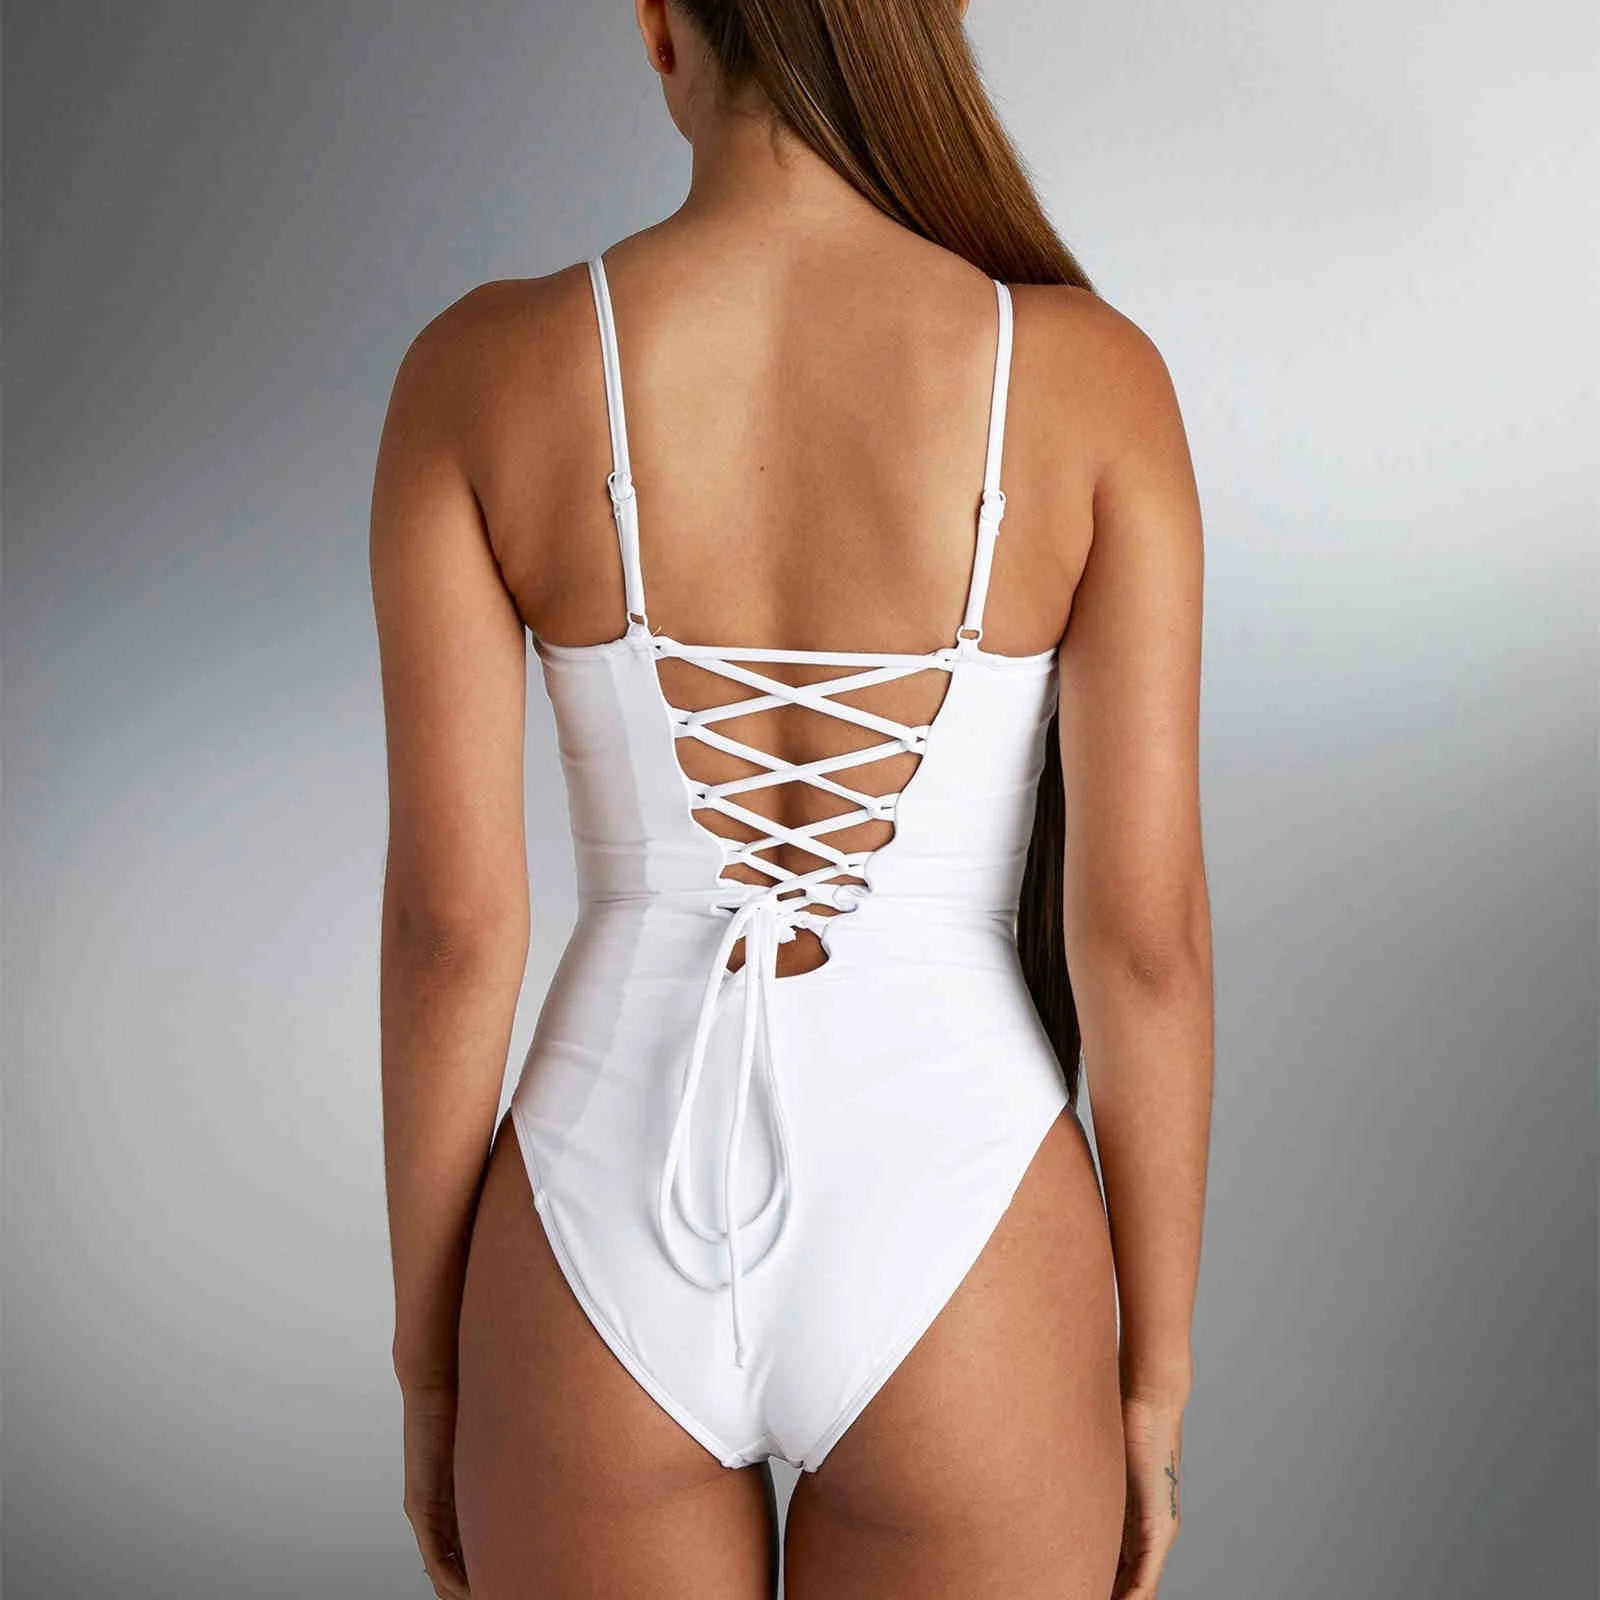 🎁Sculpting Corset Swimsuits🎉Buy 2 Free Shipping🎁 mysite